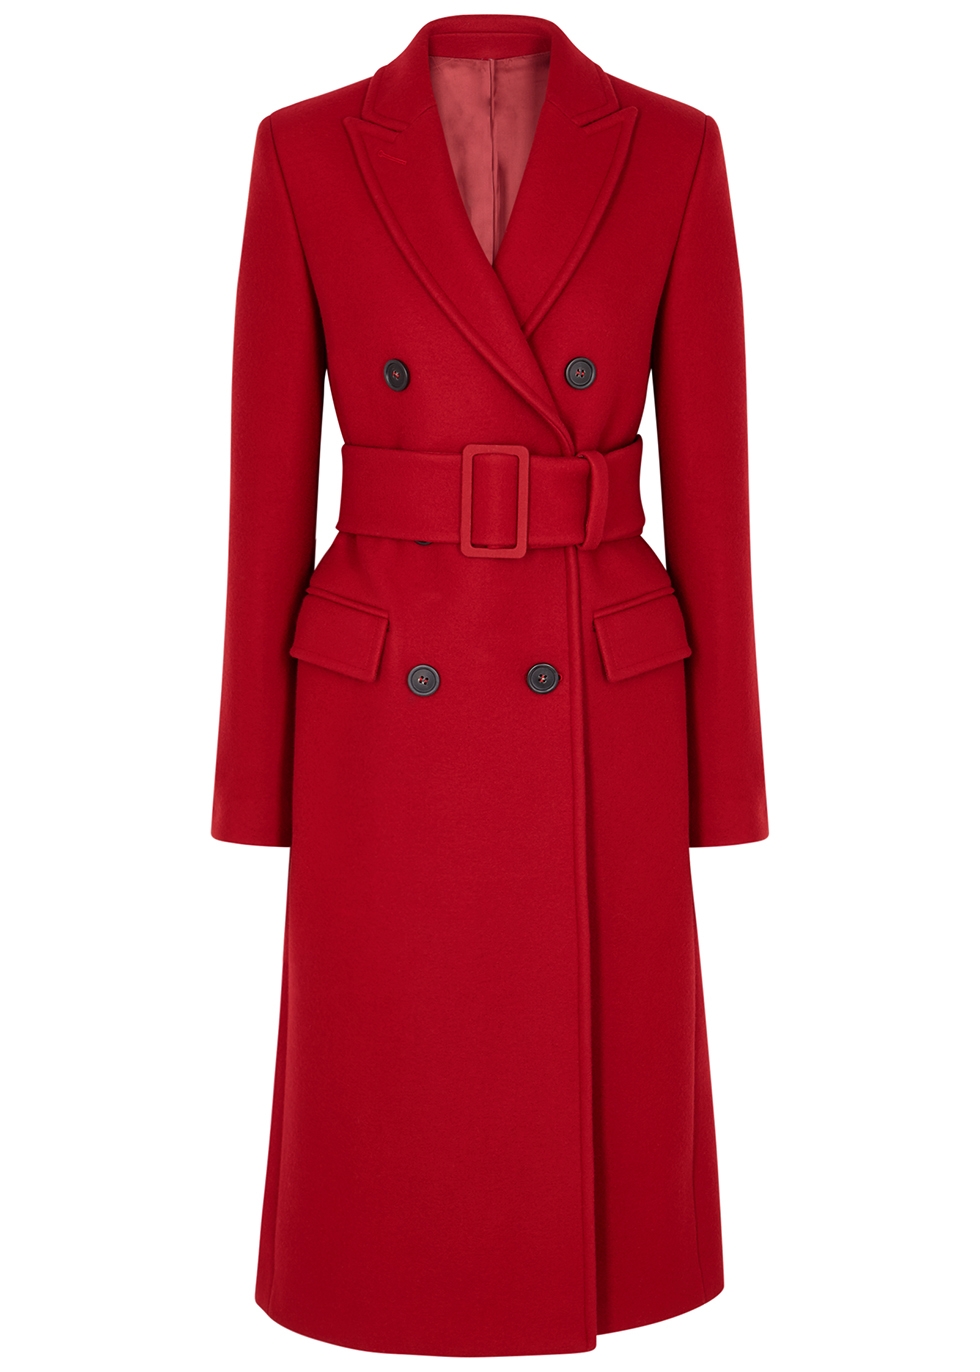 Helmut Lang Red double-breasted wool-blend coat - Harvey Nichols